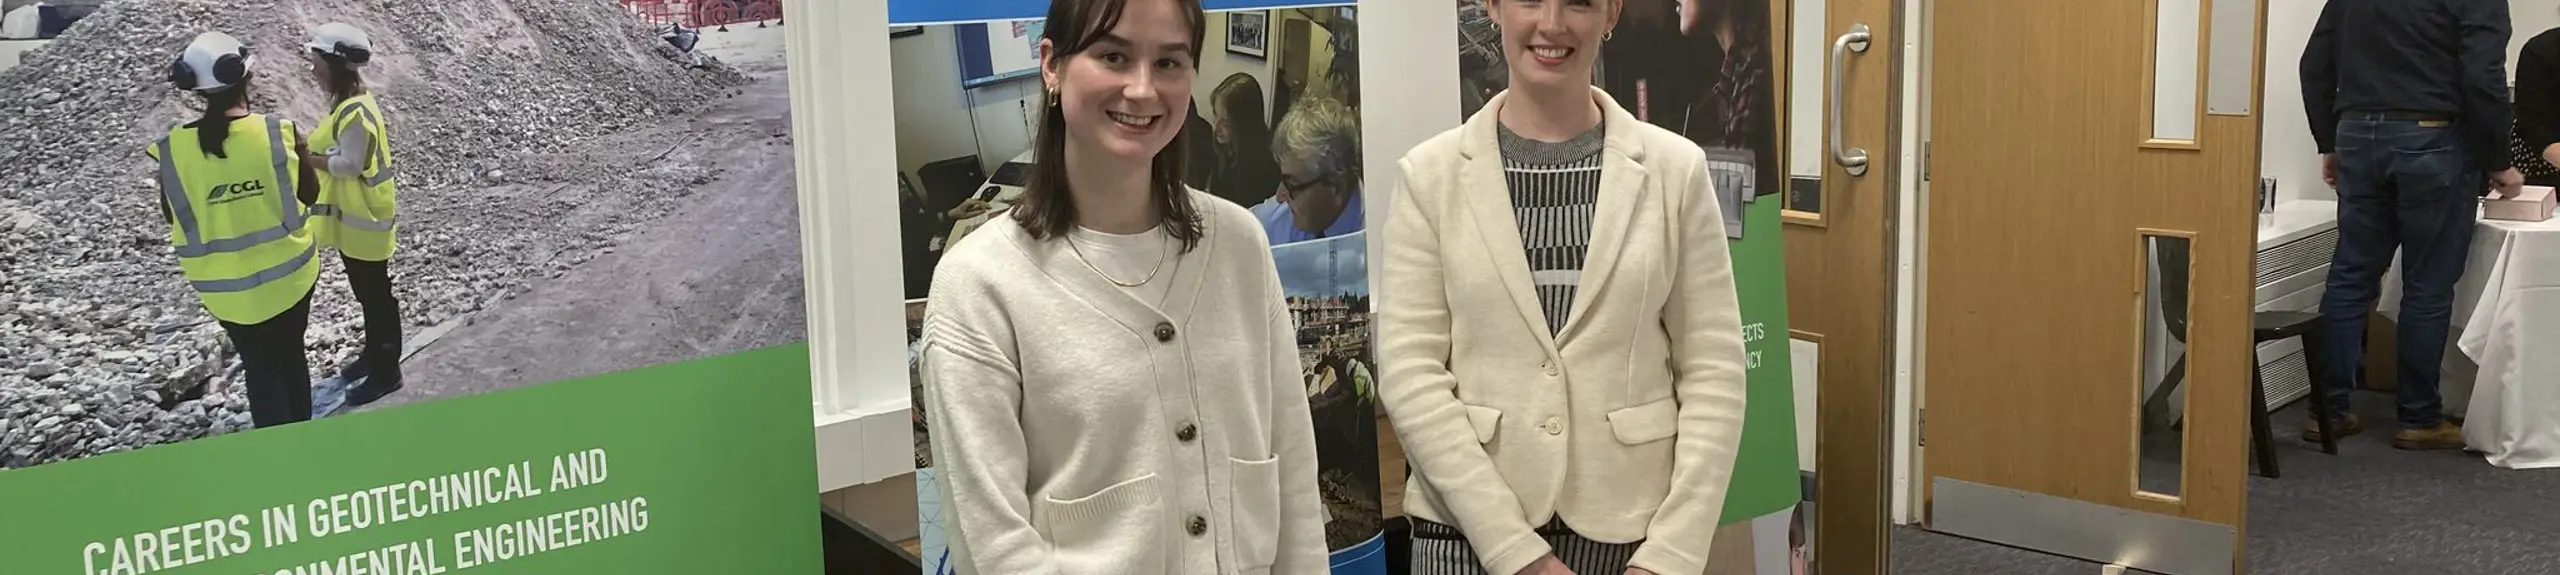 Two women in front of a careers stand